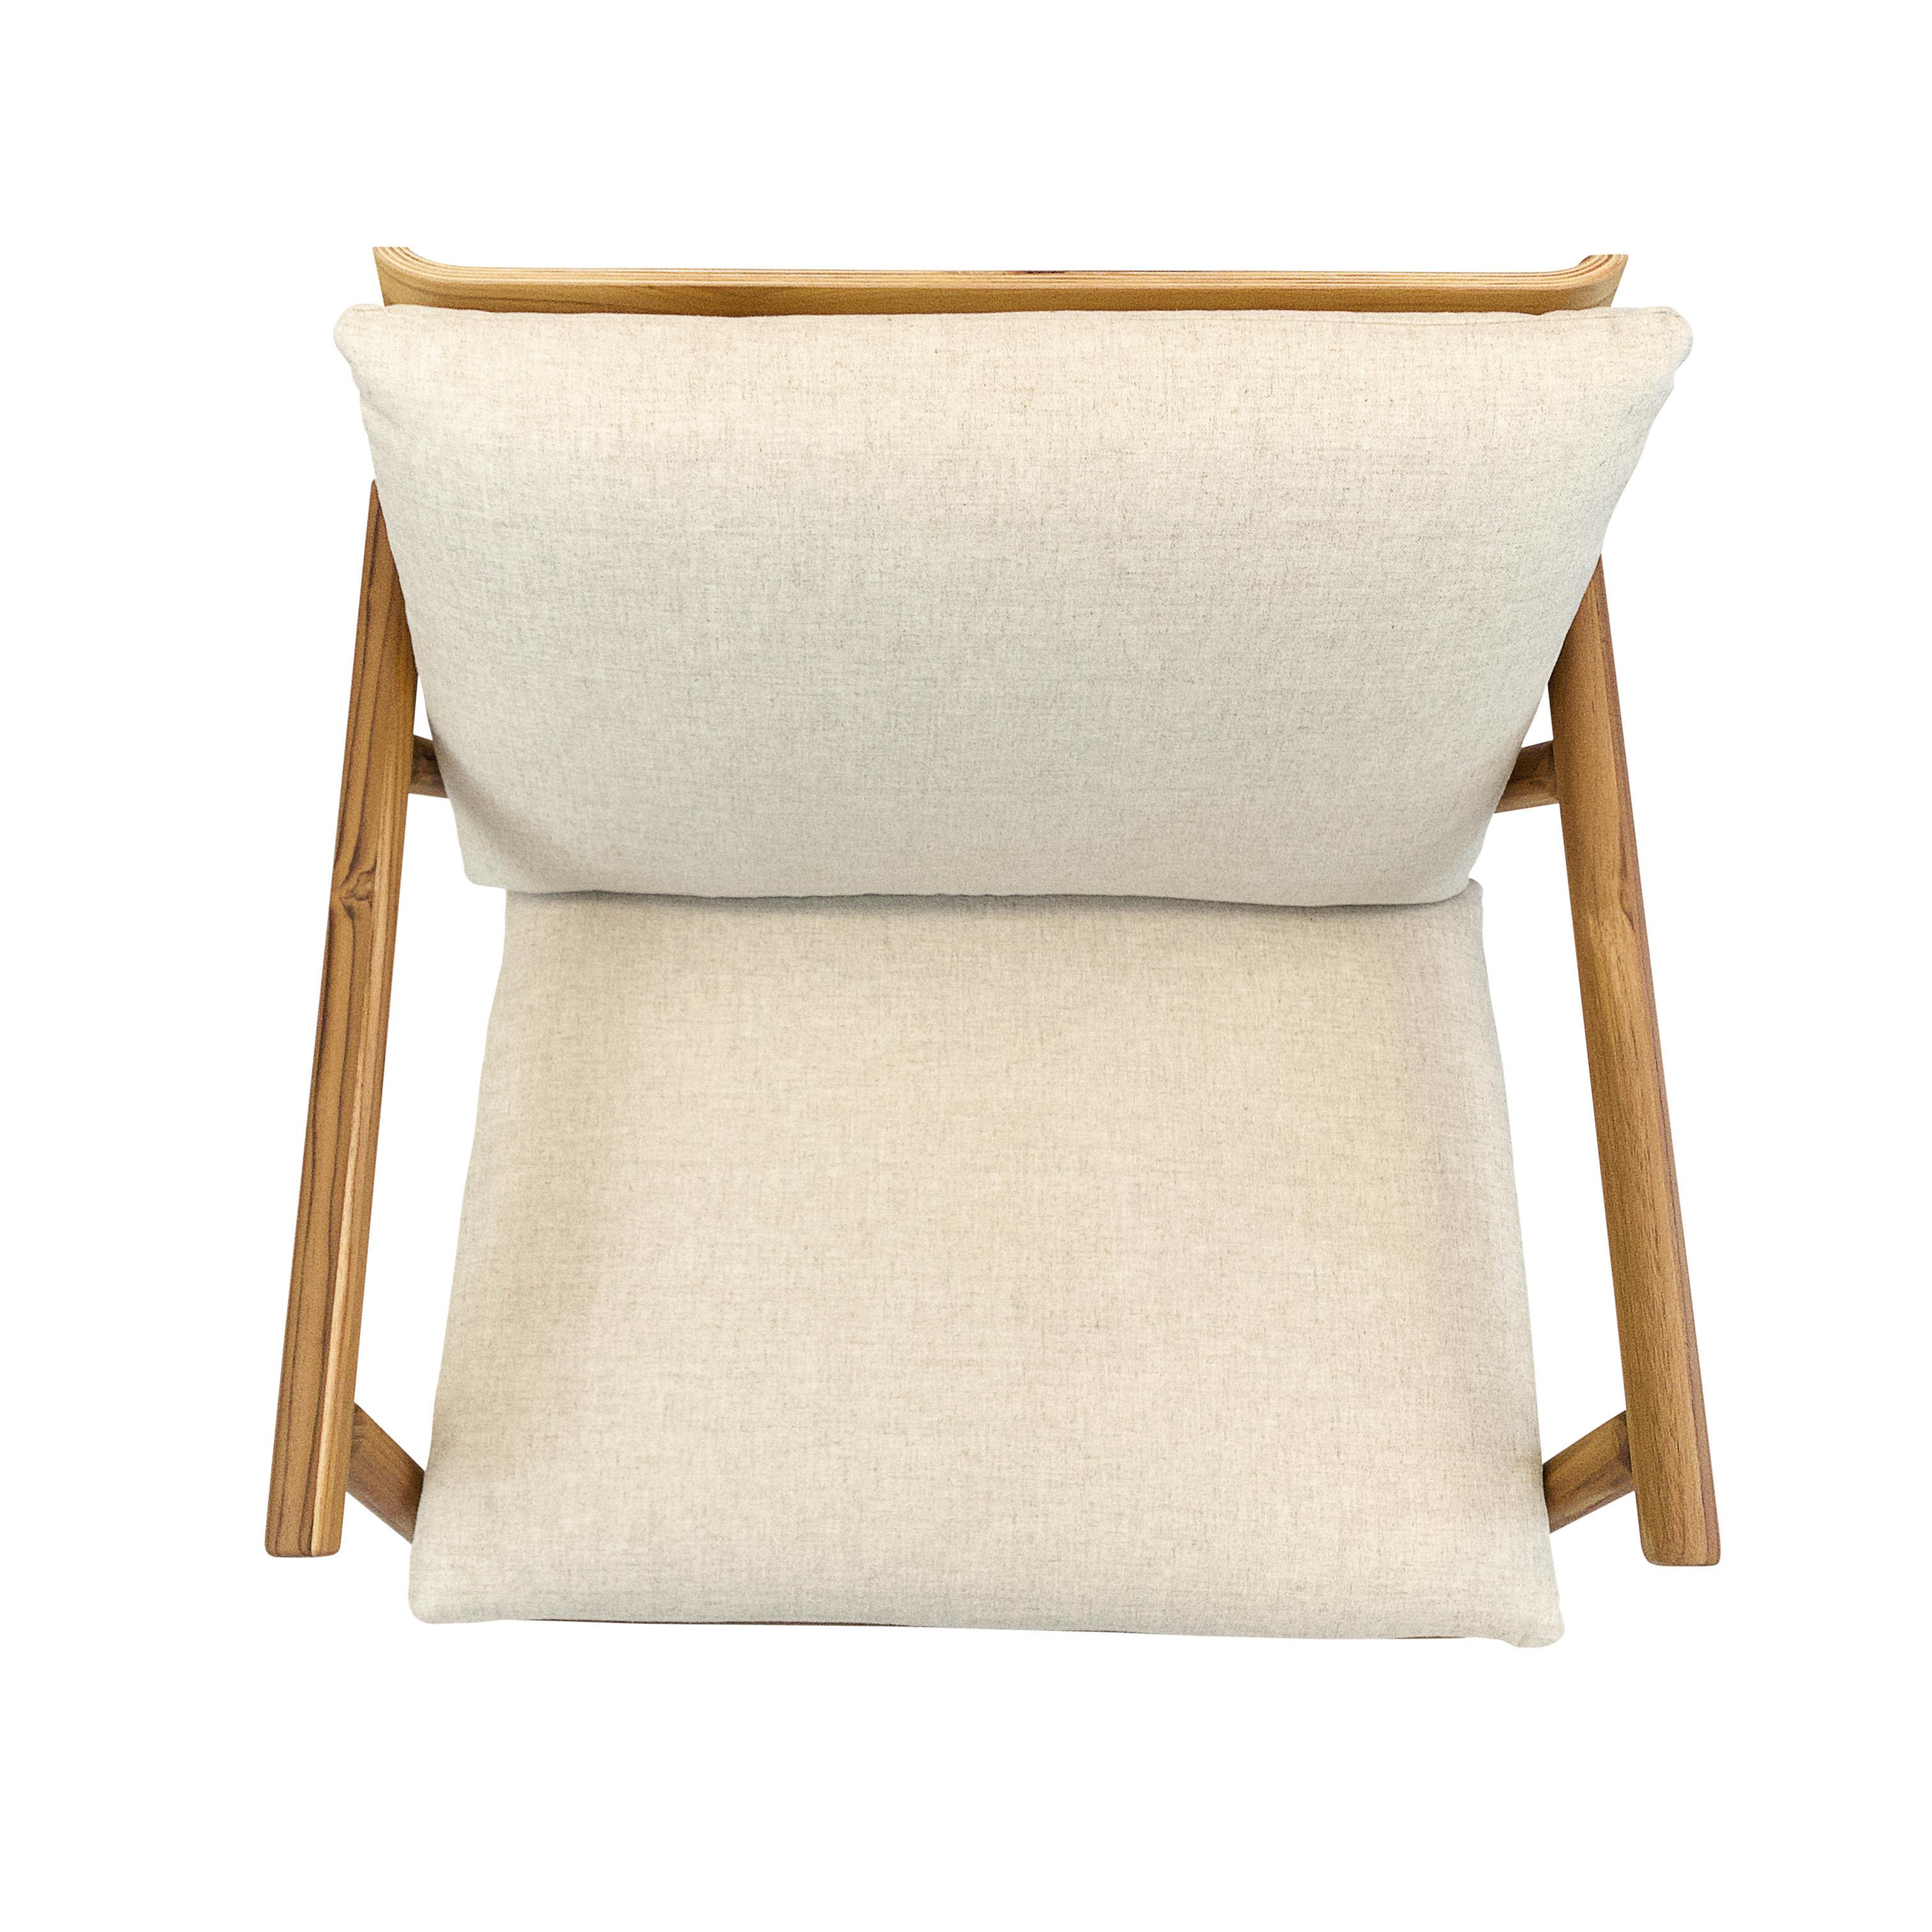 Tai Armchair in Teak Wood Finish with Light Beige Fabric Cushions For Sale 4